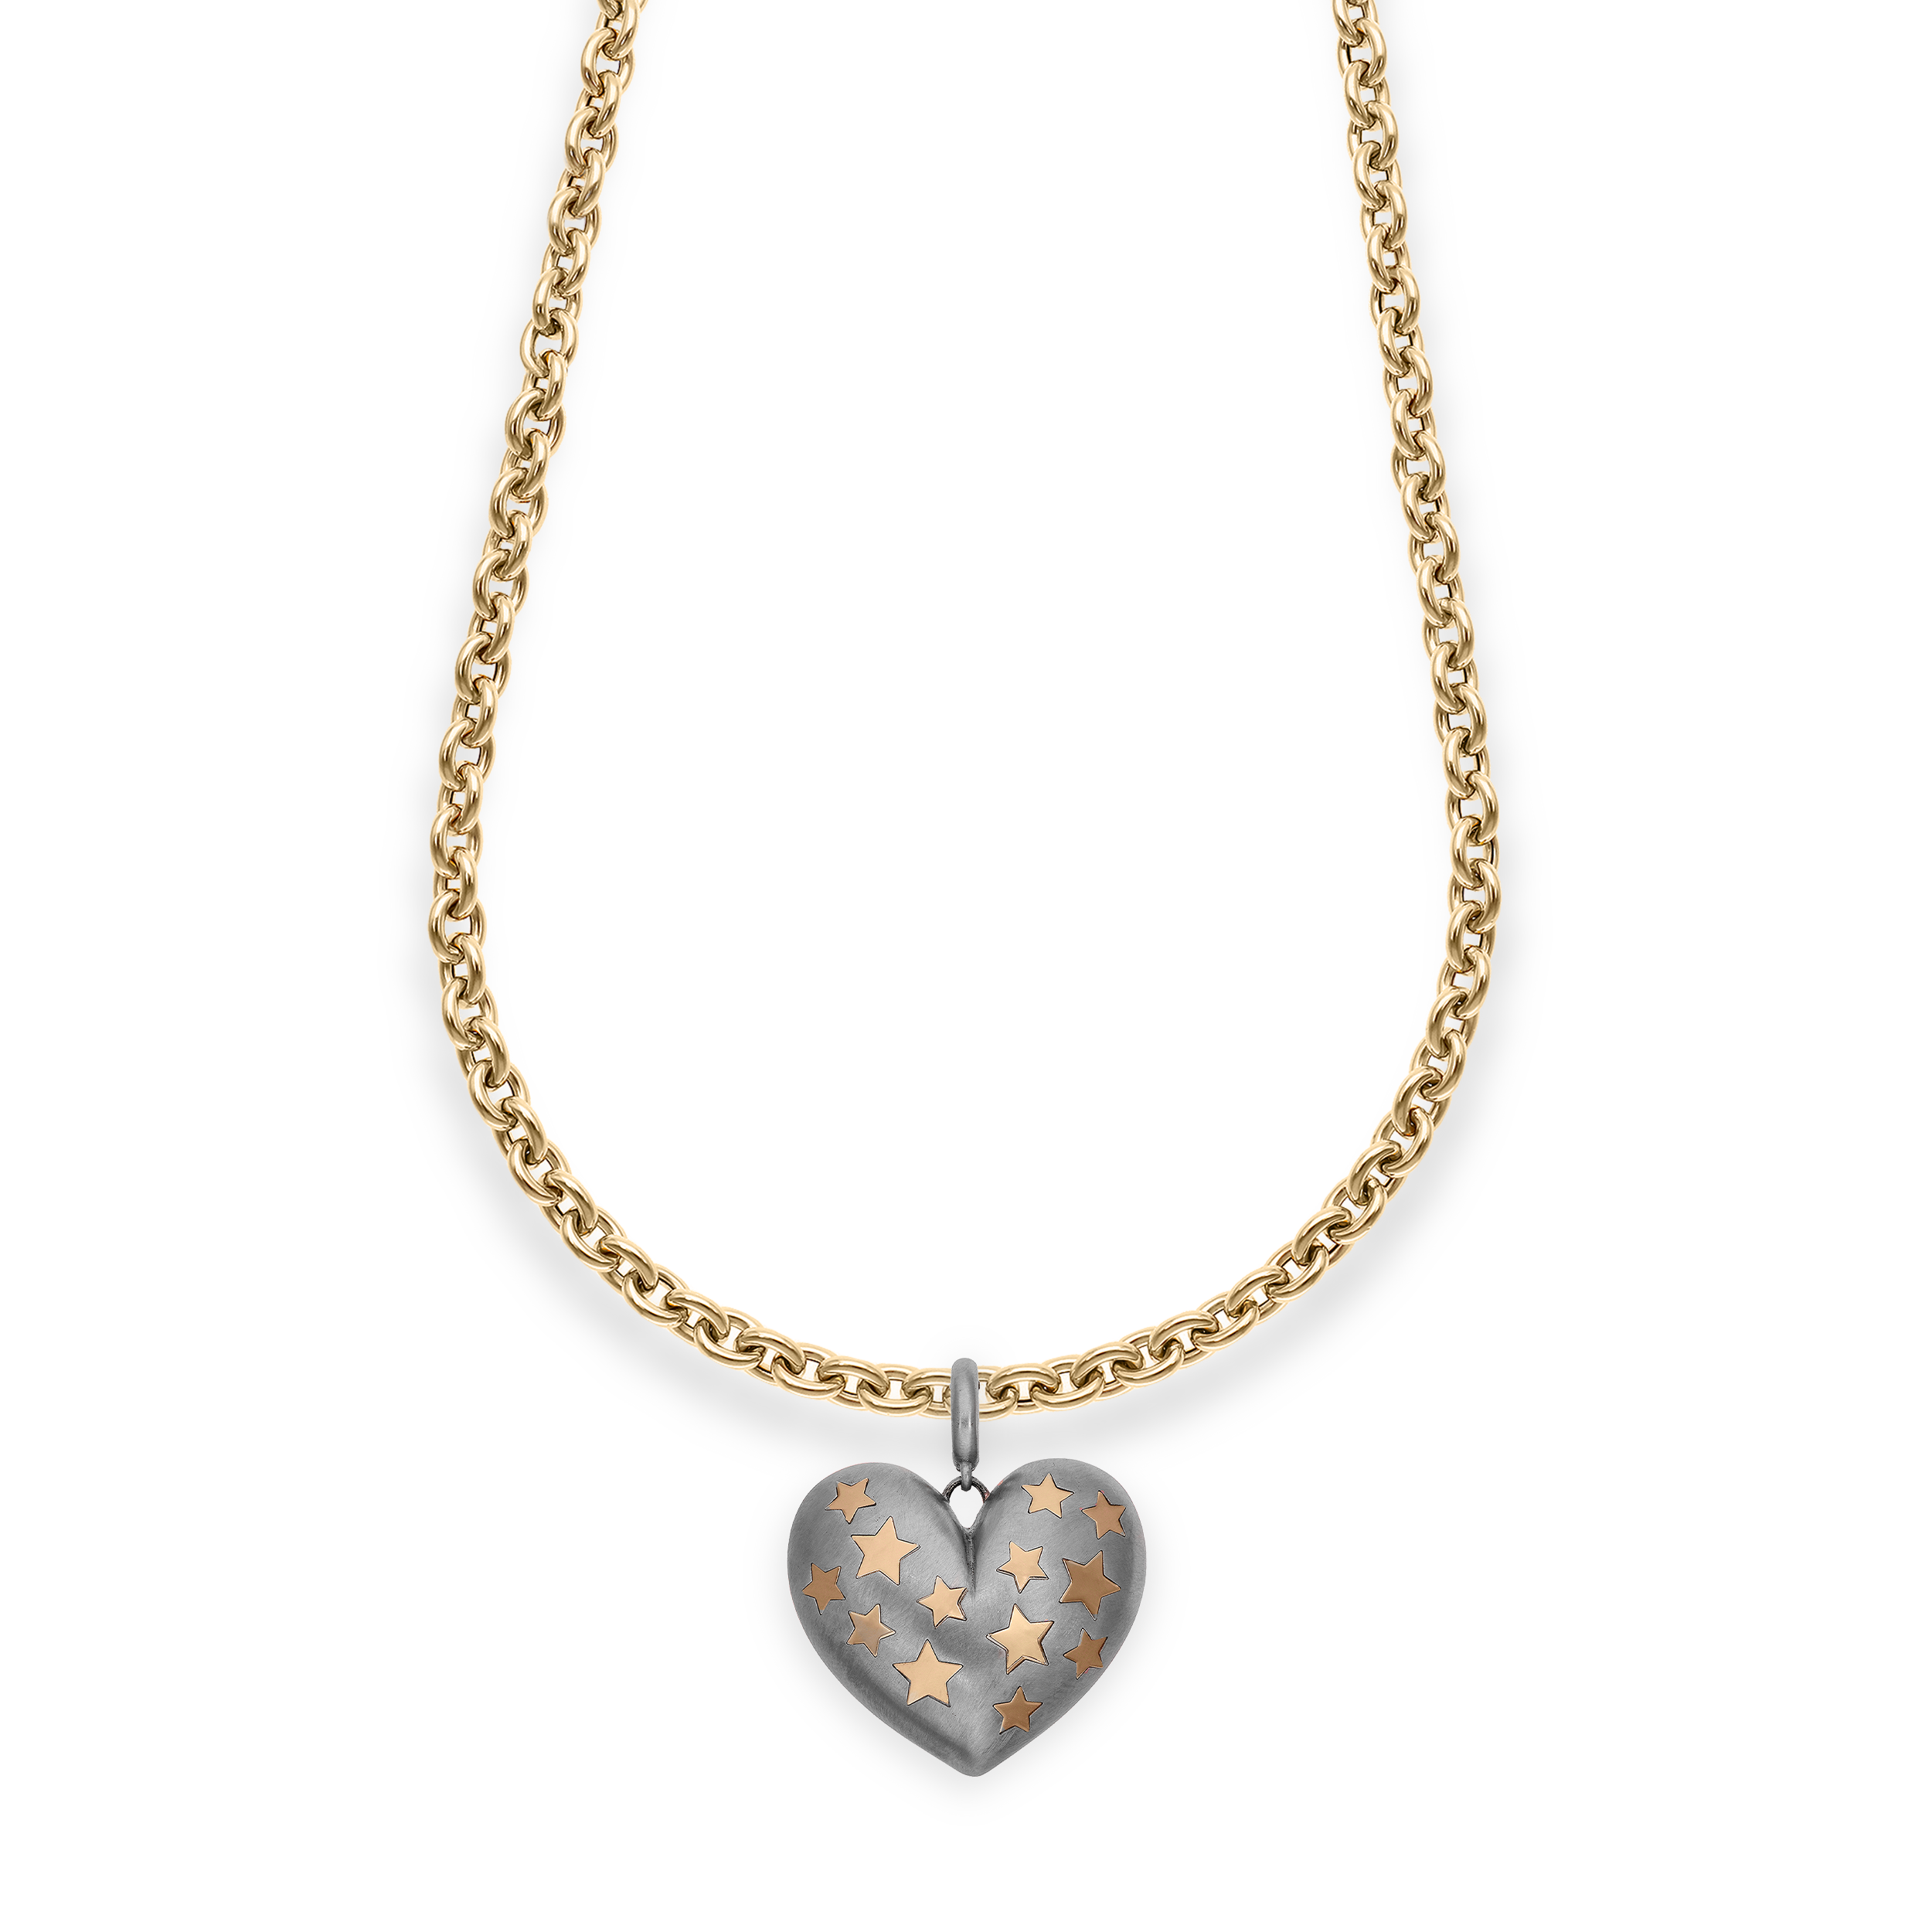 Paulette Brushed White Gold Heart with Yellow Gold Stars Pendant on Long Chain